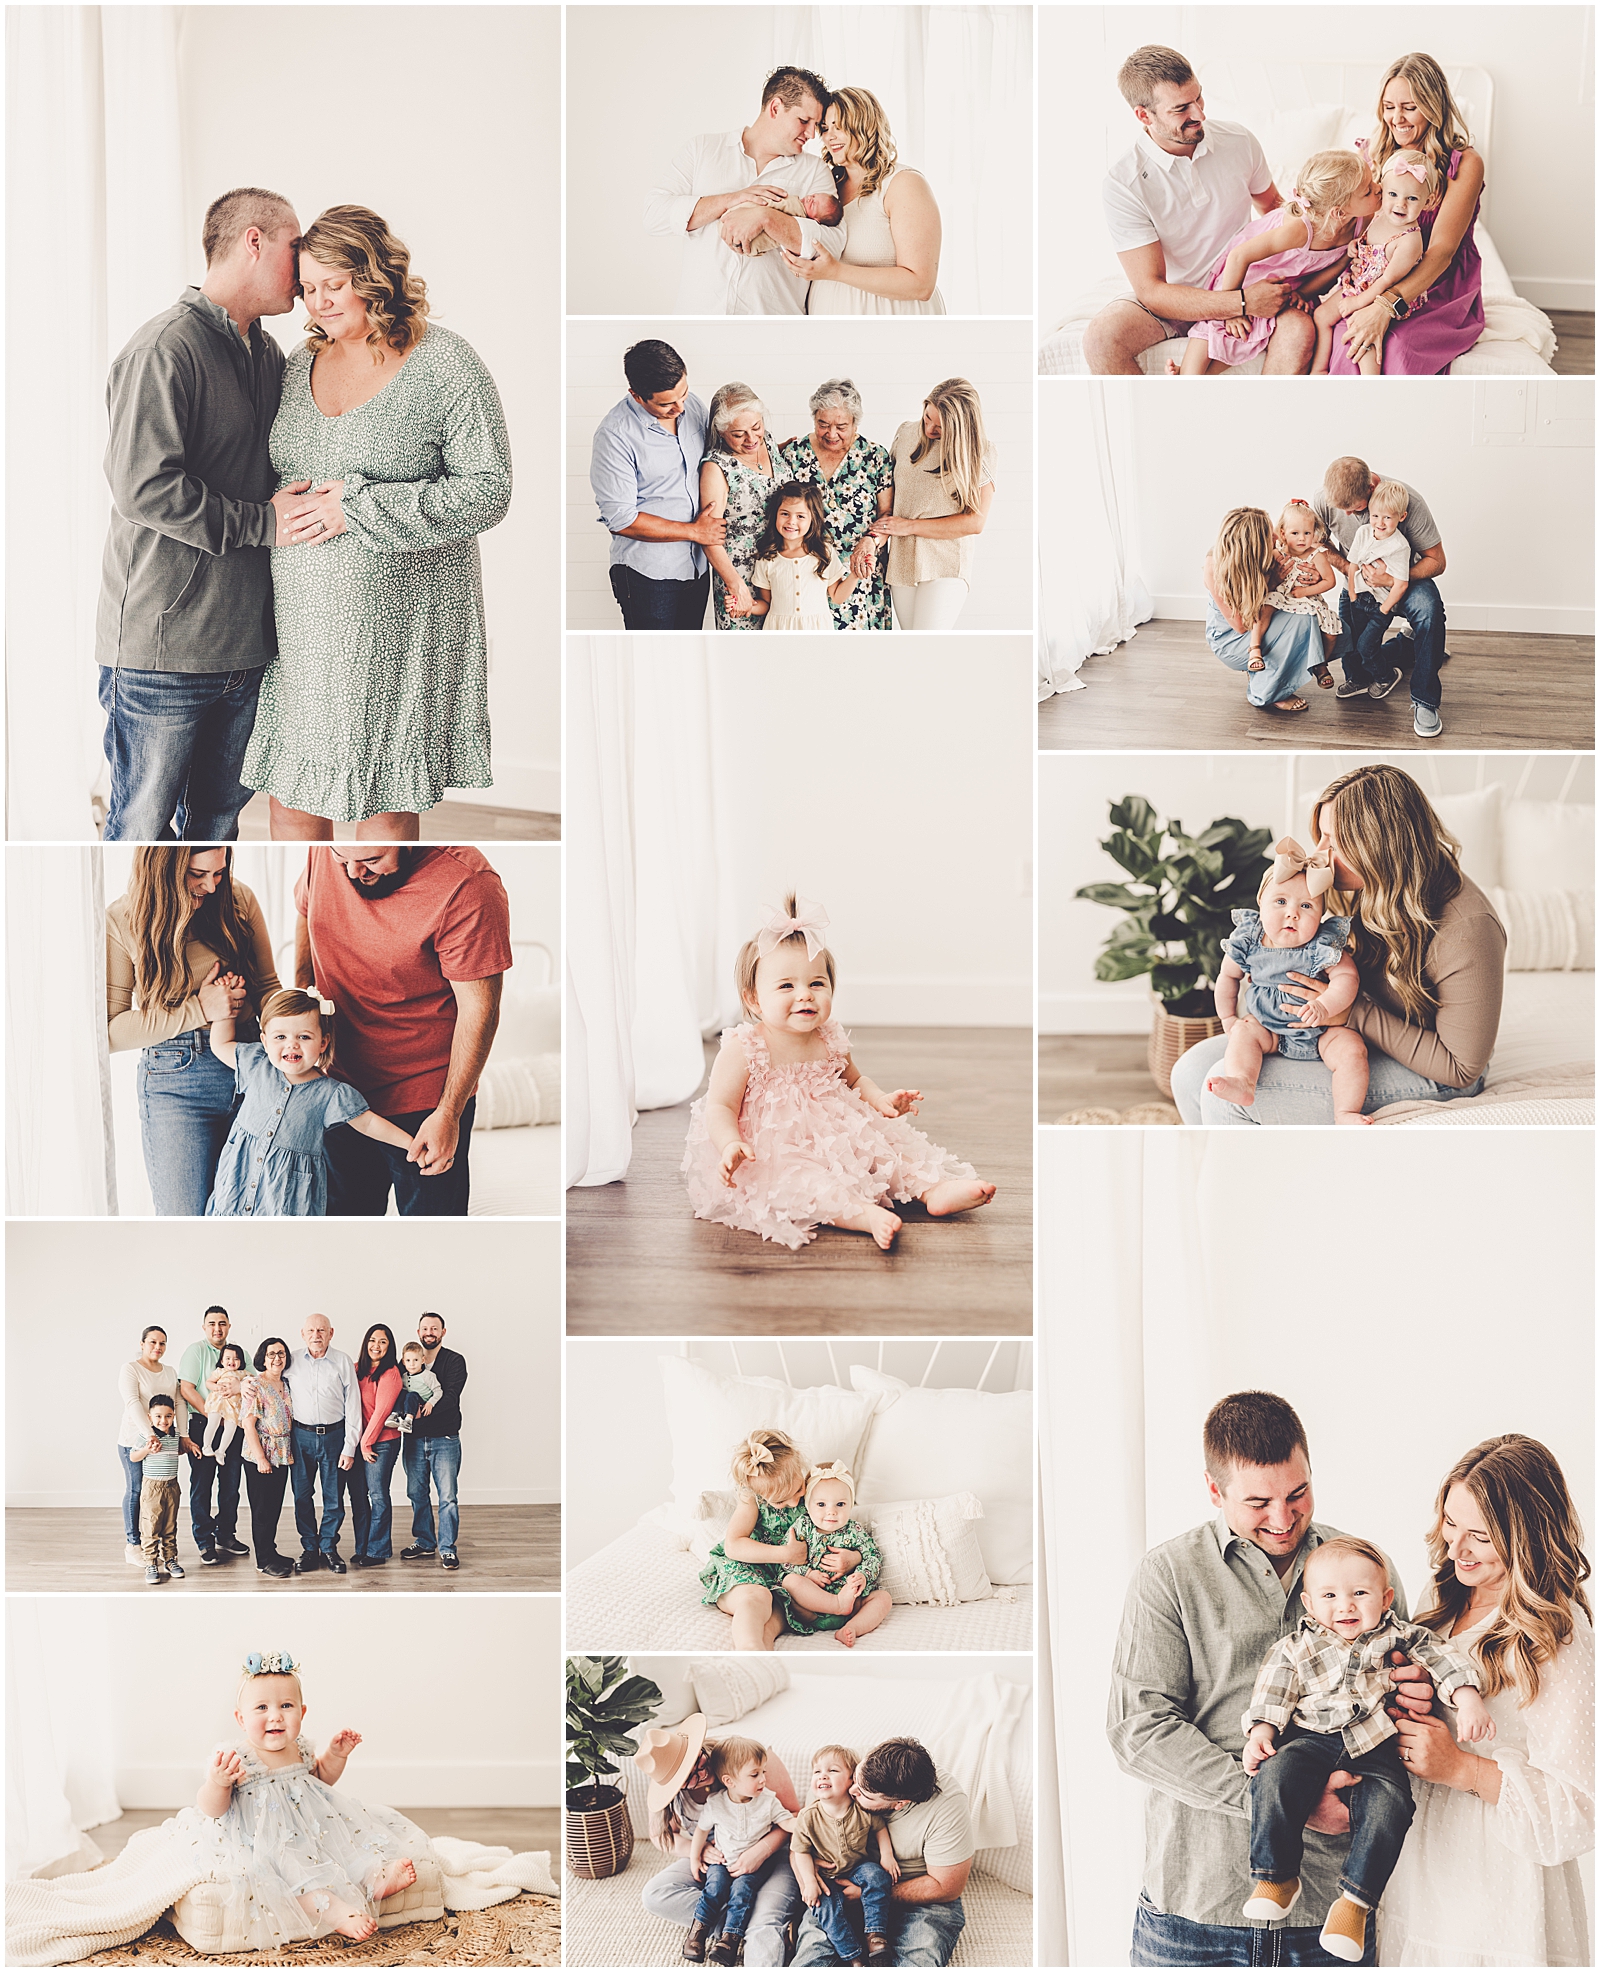 Kankakee County family photographer Kara Evans Photographer's recap of 2023 sessions in Kankakee County, Iroquois County, and Chicagoland.